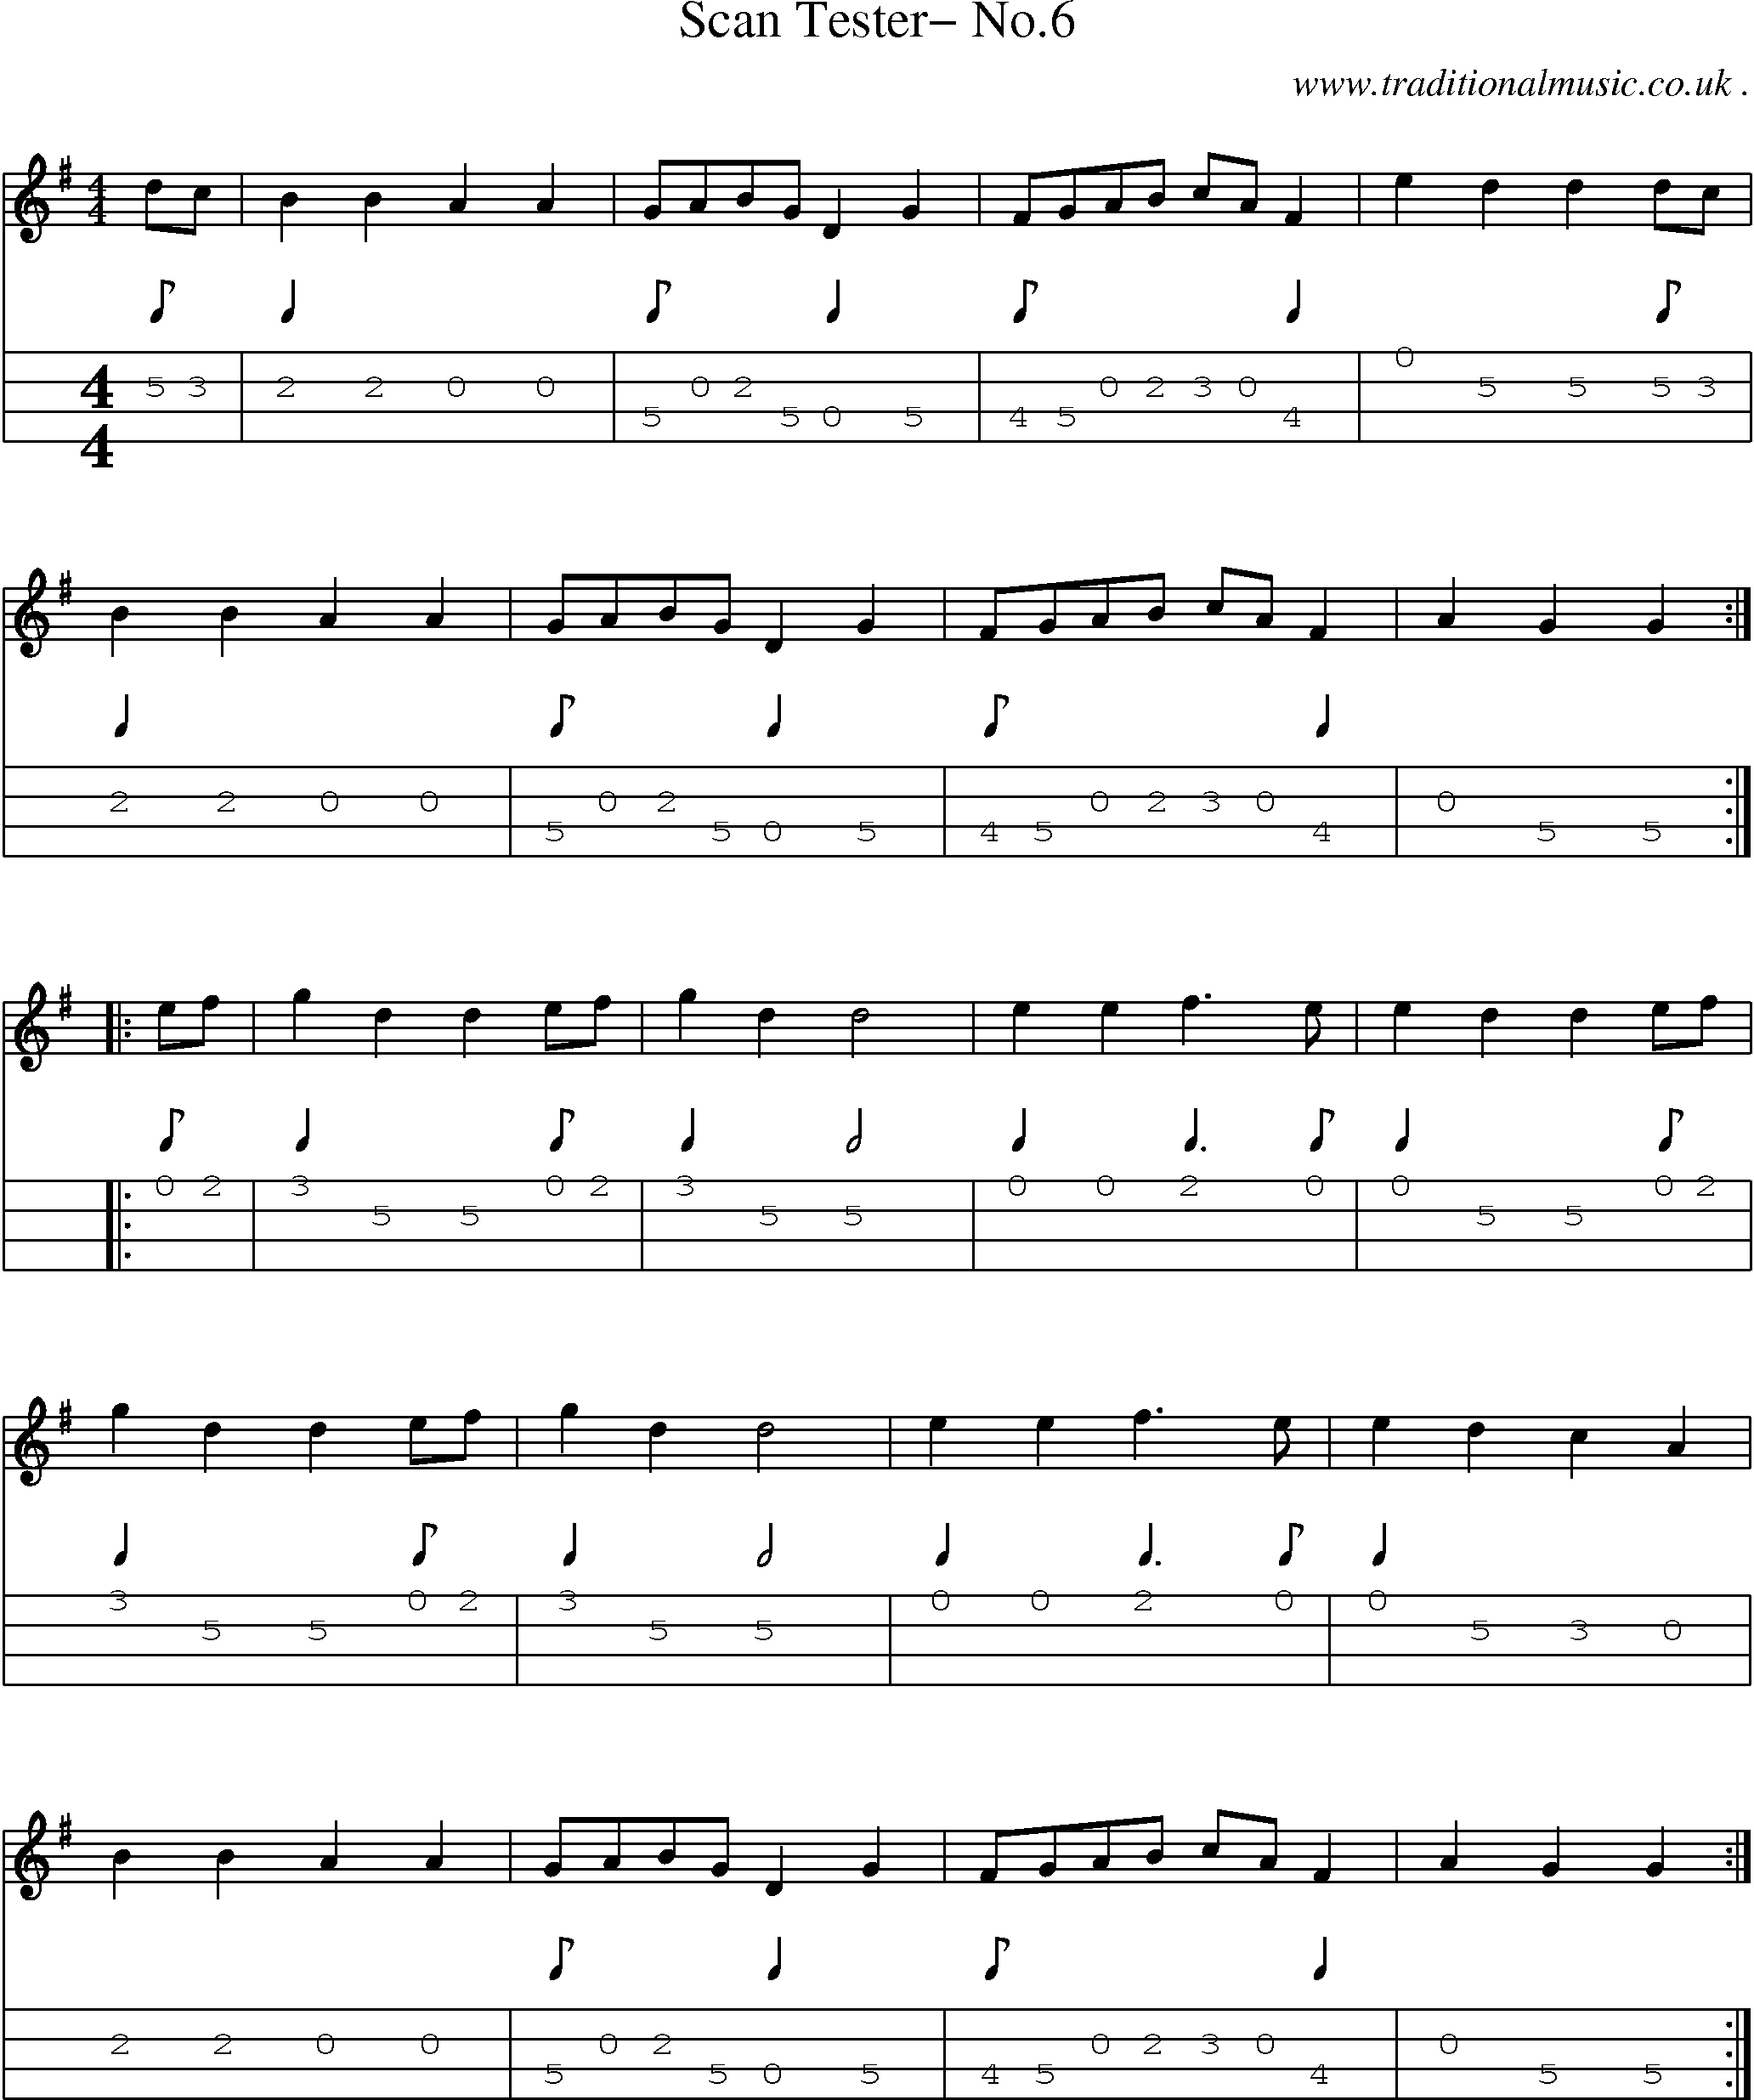 Sheet-Music and Mandolin Tabs for Scan Tester No6